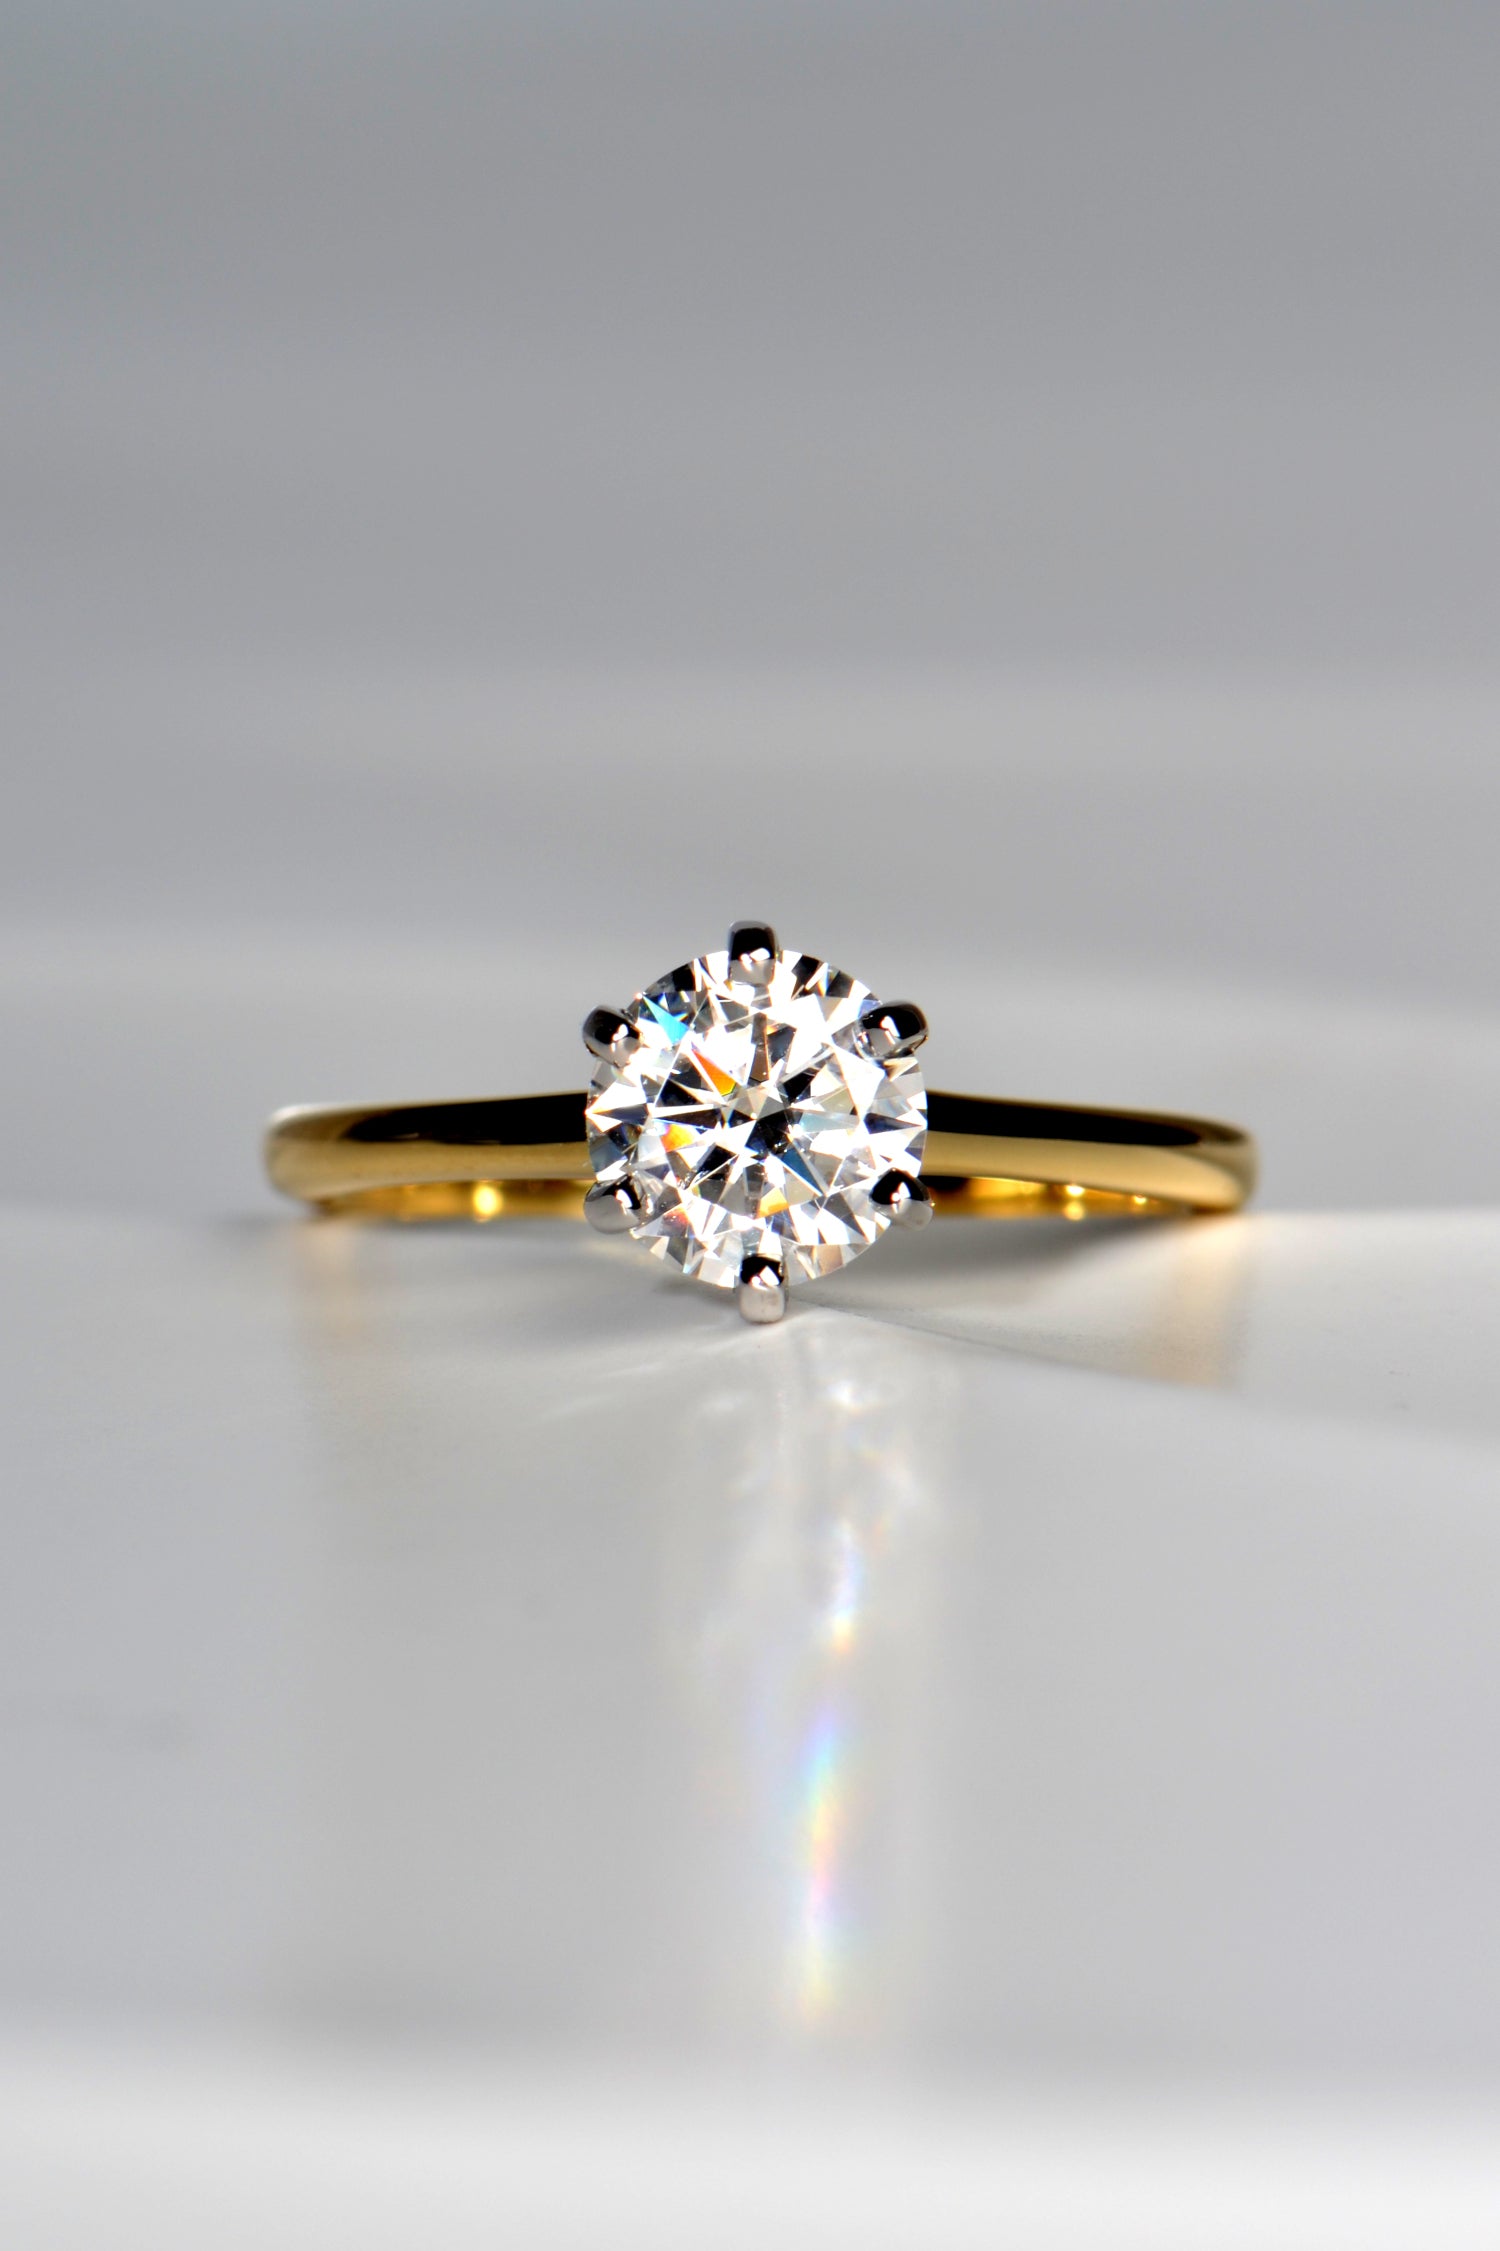 ethical six claw round brilliant cut one carat moissanite engagement ring with an 18ct yellow gold band and an 18ct white gold setting